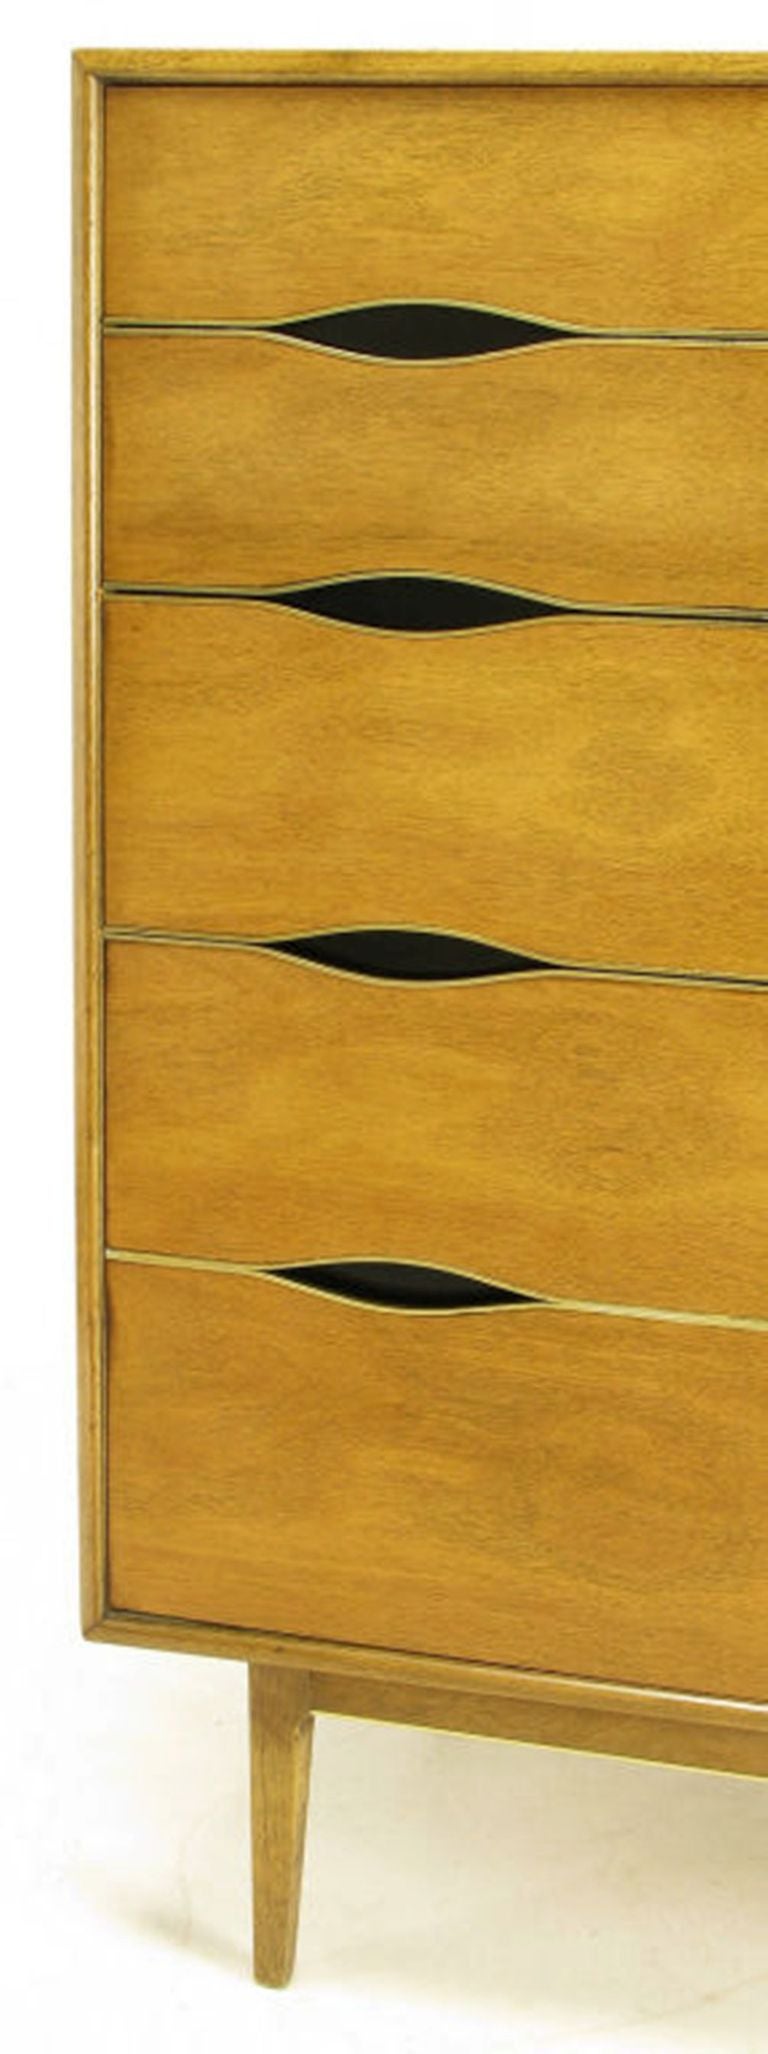 Vignola Furniture Bleached Walnut and Brass Five-Drawer Tall Chest For Sale 1